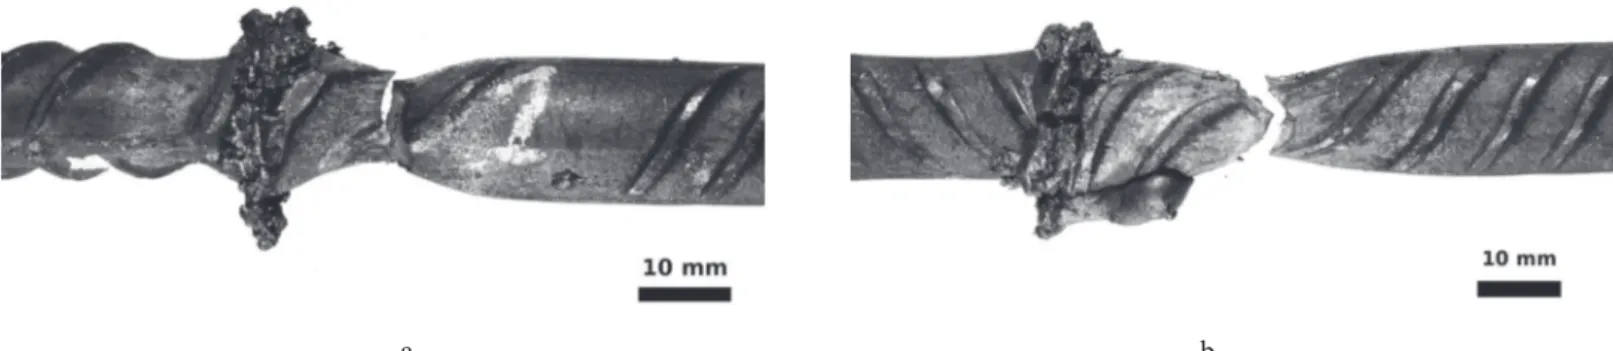 Figure 9. Welded specimens of hot-rolled (a) and heat-hardened (b) concrete reinforcement after tensile tests